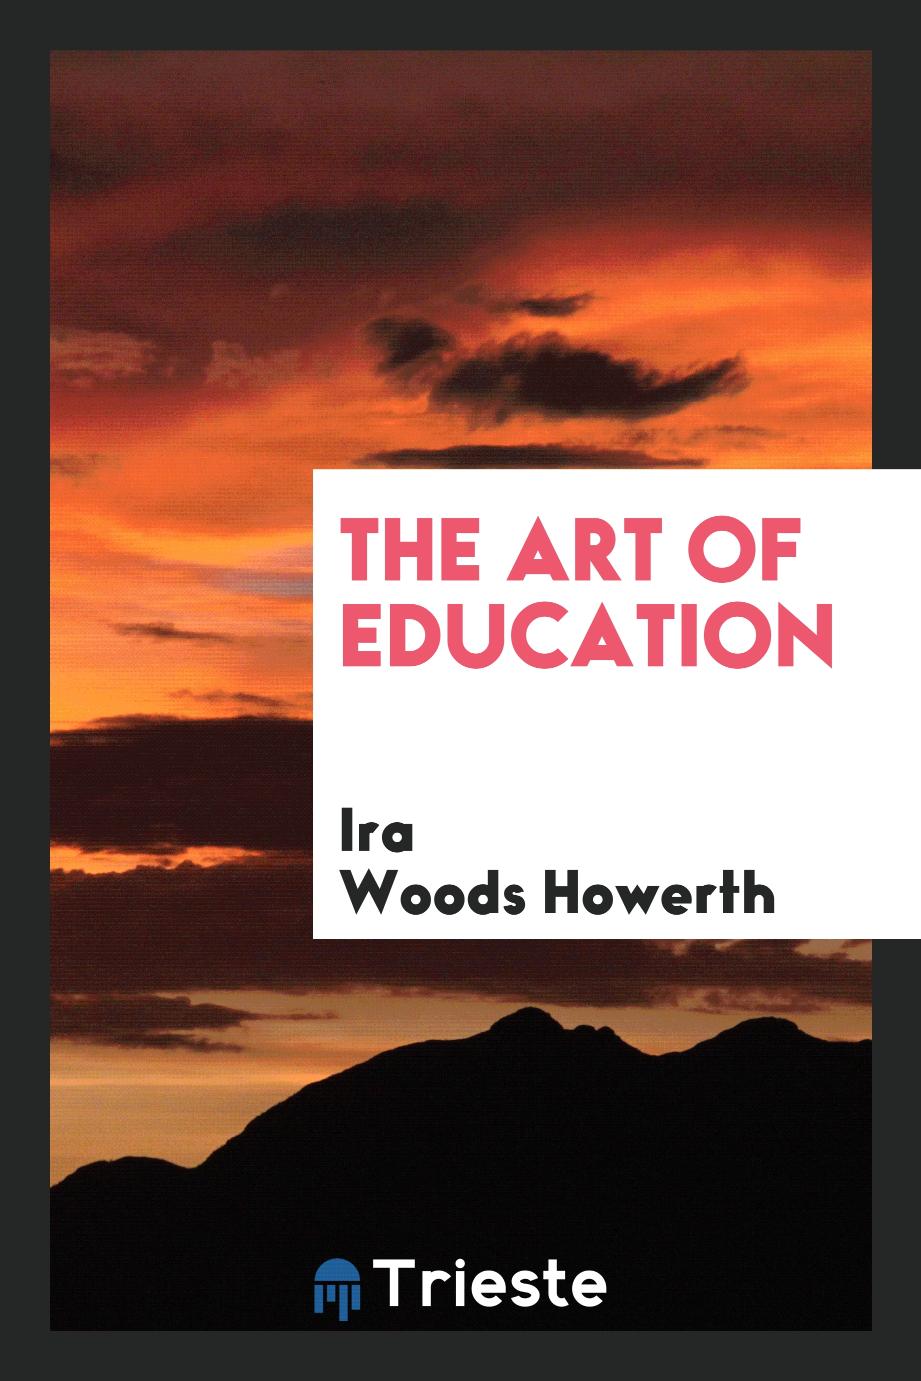 The art of education